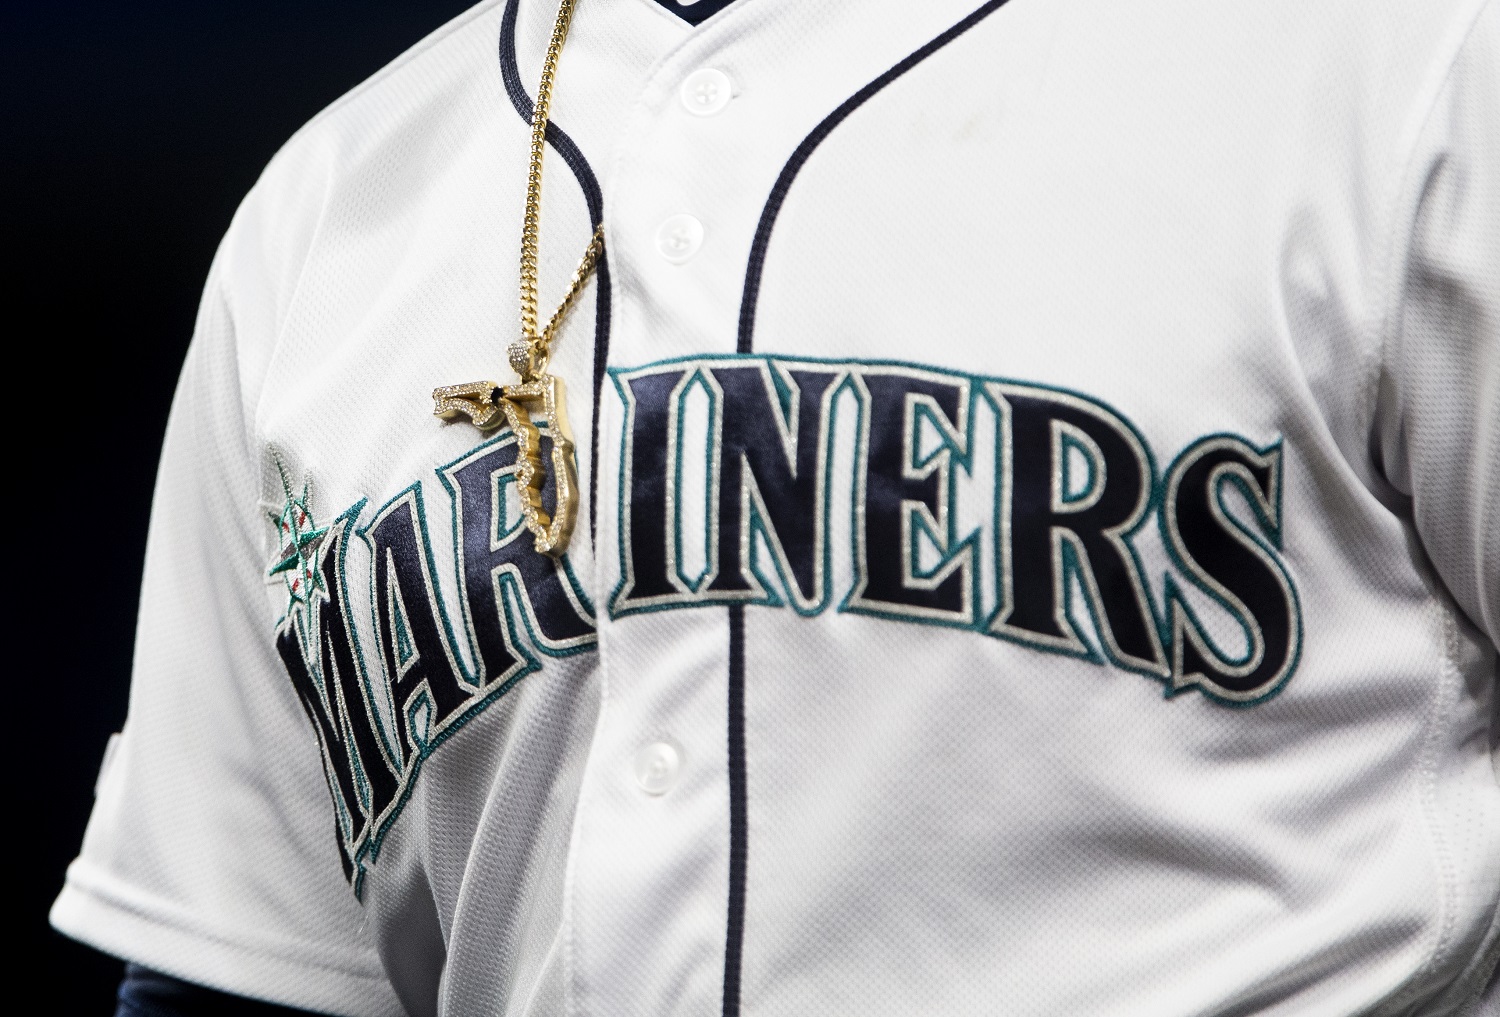 The Seattle Mariners, run my Kevin Mather, are looking for their first trip to the MLB playoffs since 2001